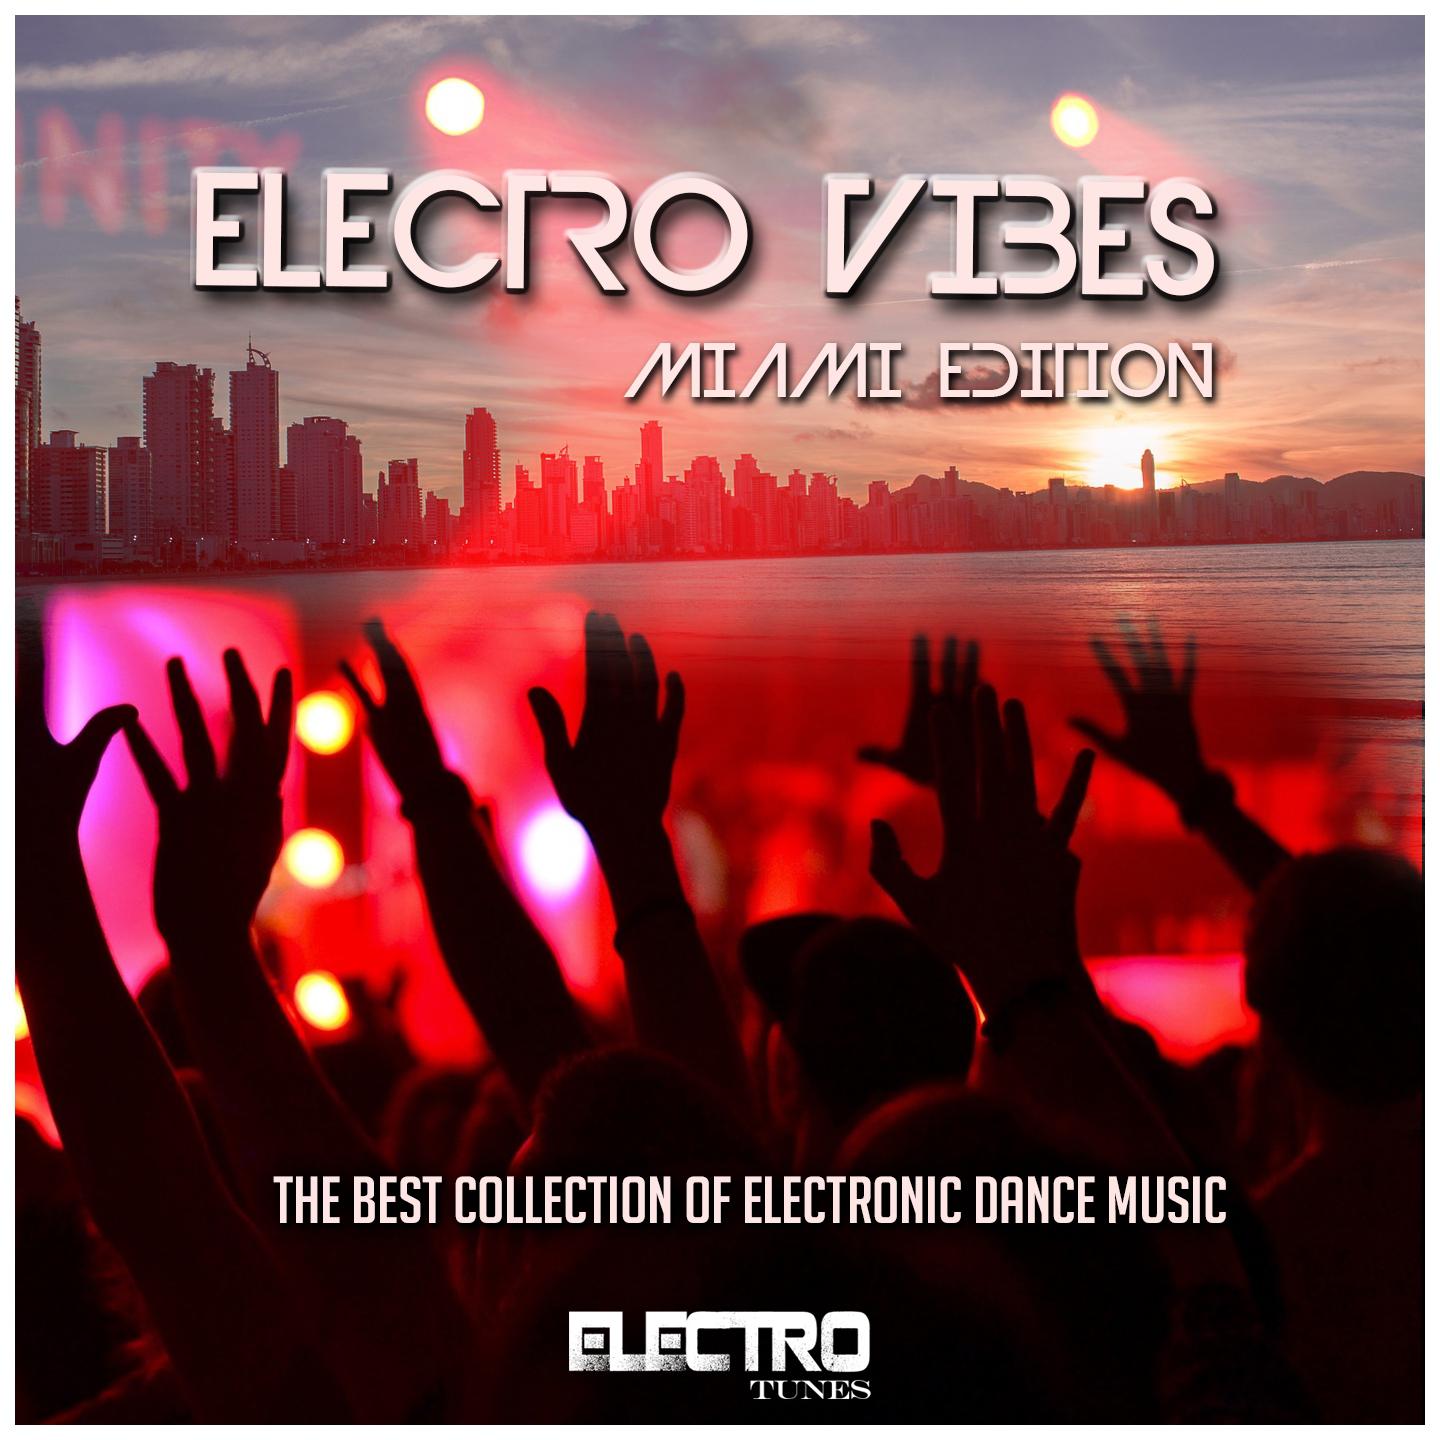 Electro Vibes (Miami Edition) (The Best Collection of Electronic Dance Music)